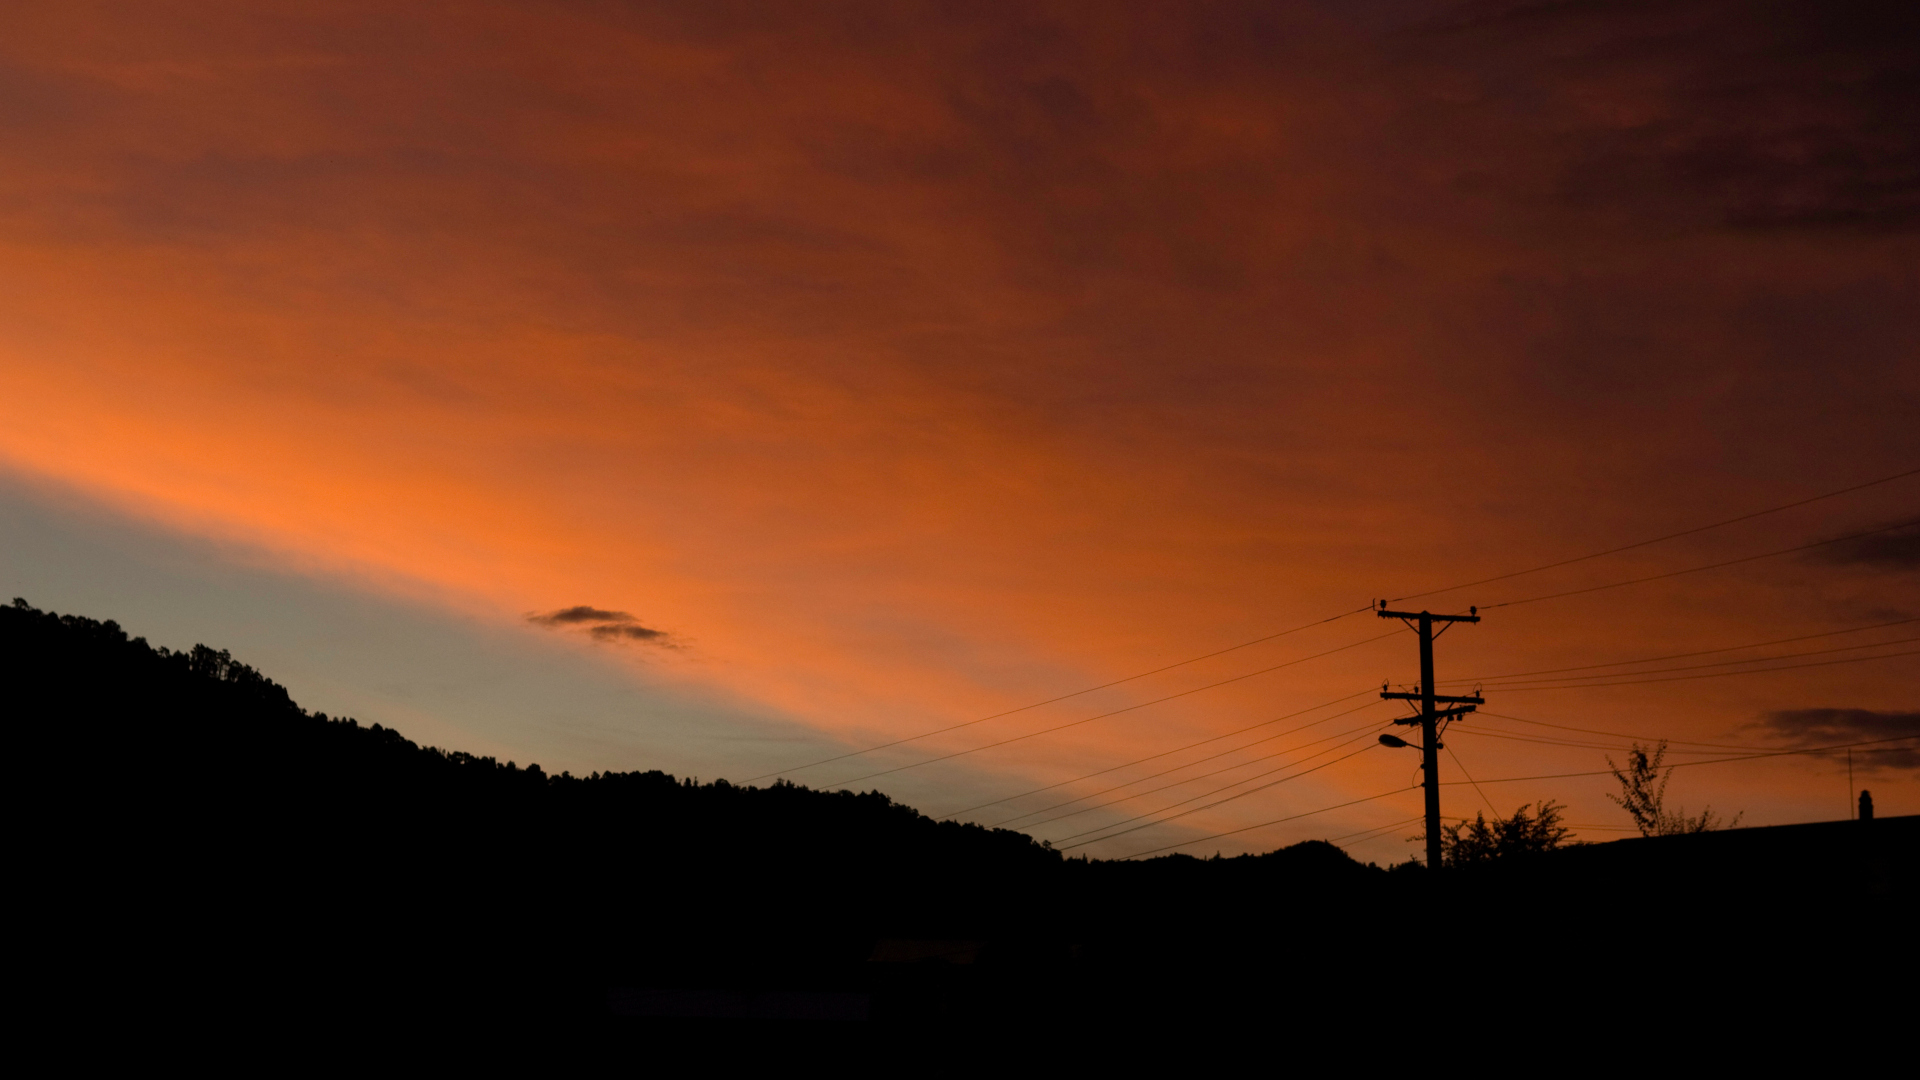 silhouette of power pole and power supply cables with sunset in the background. small stripe of clear sky on the left.